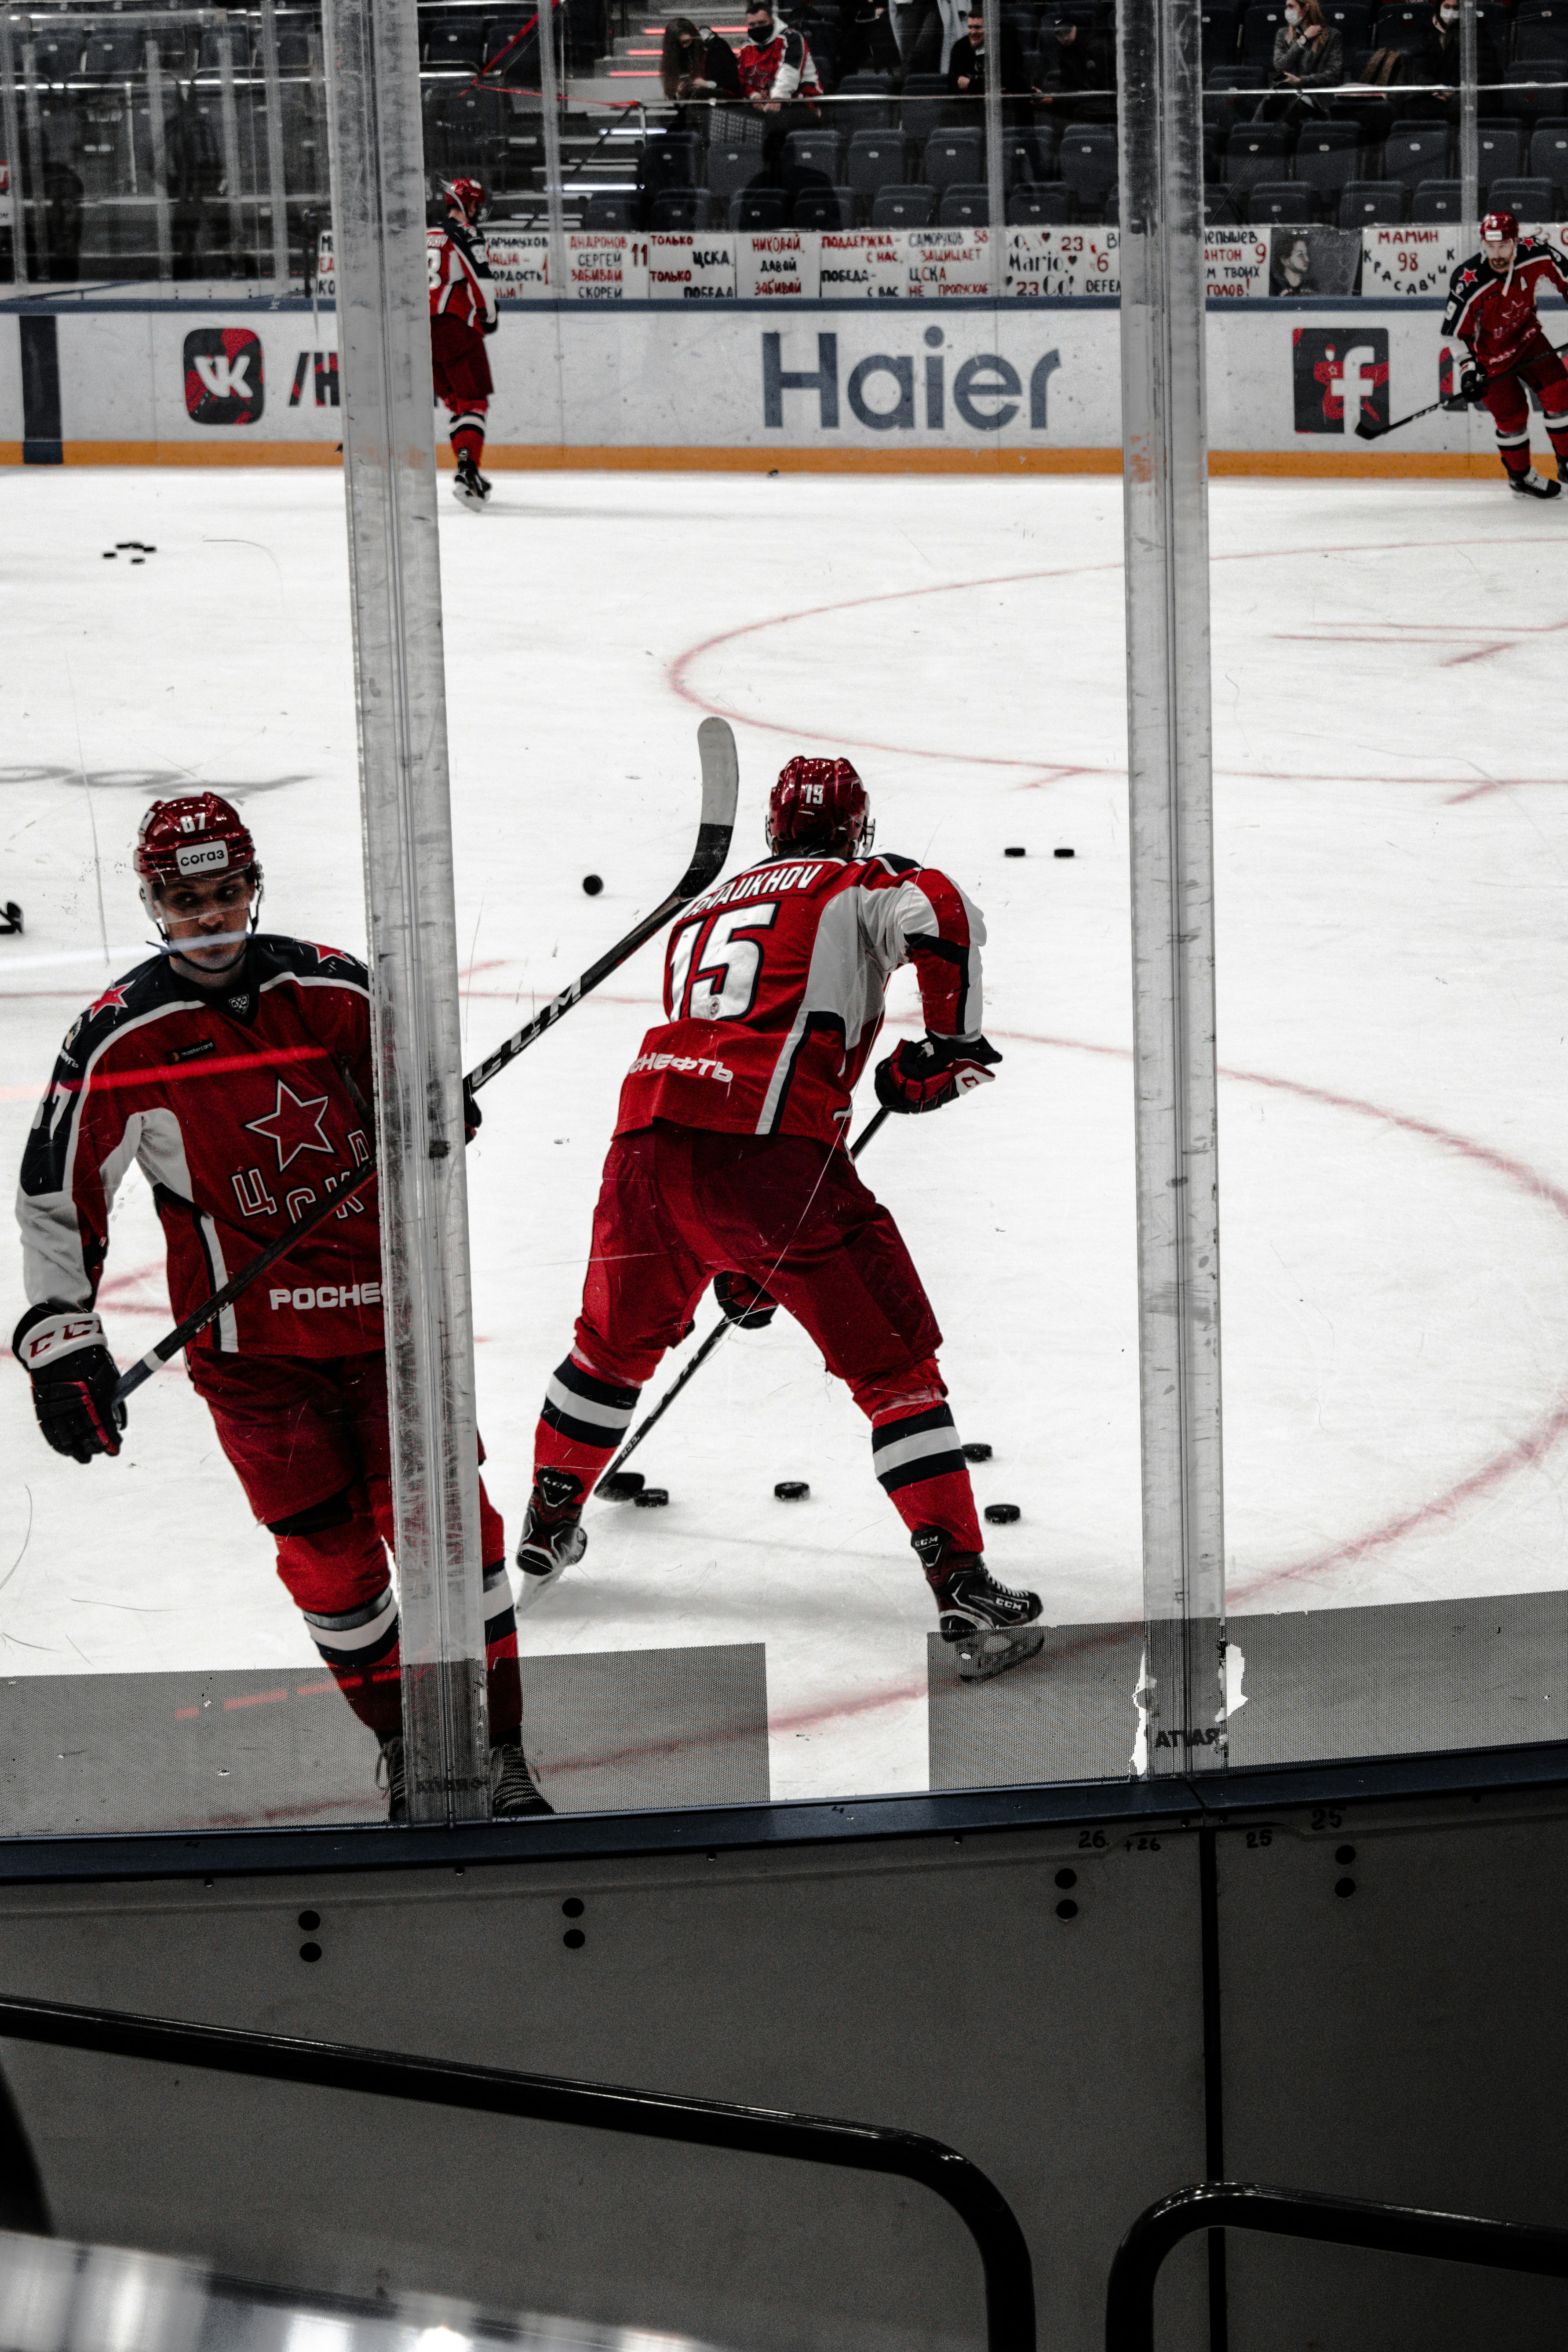 2 men in red ice hockey jersey playing ice hockey